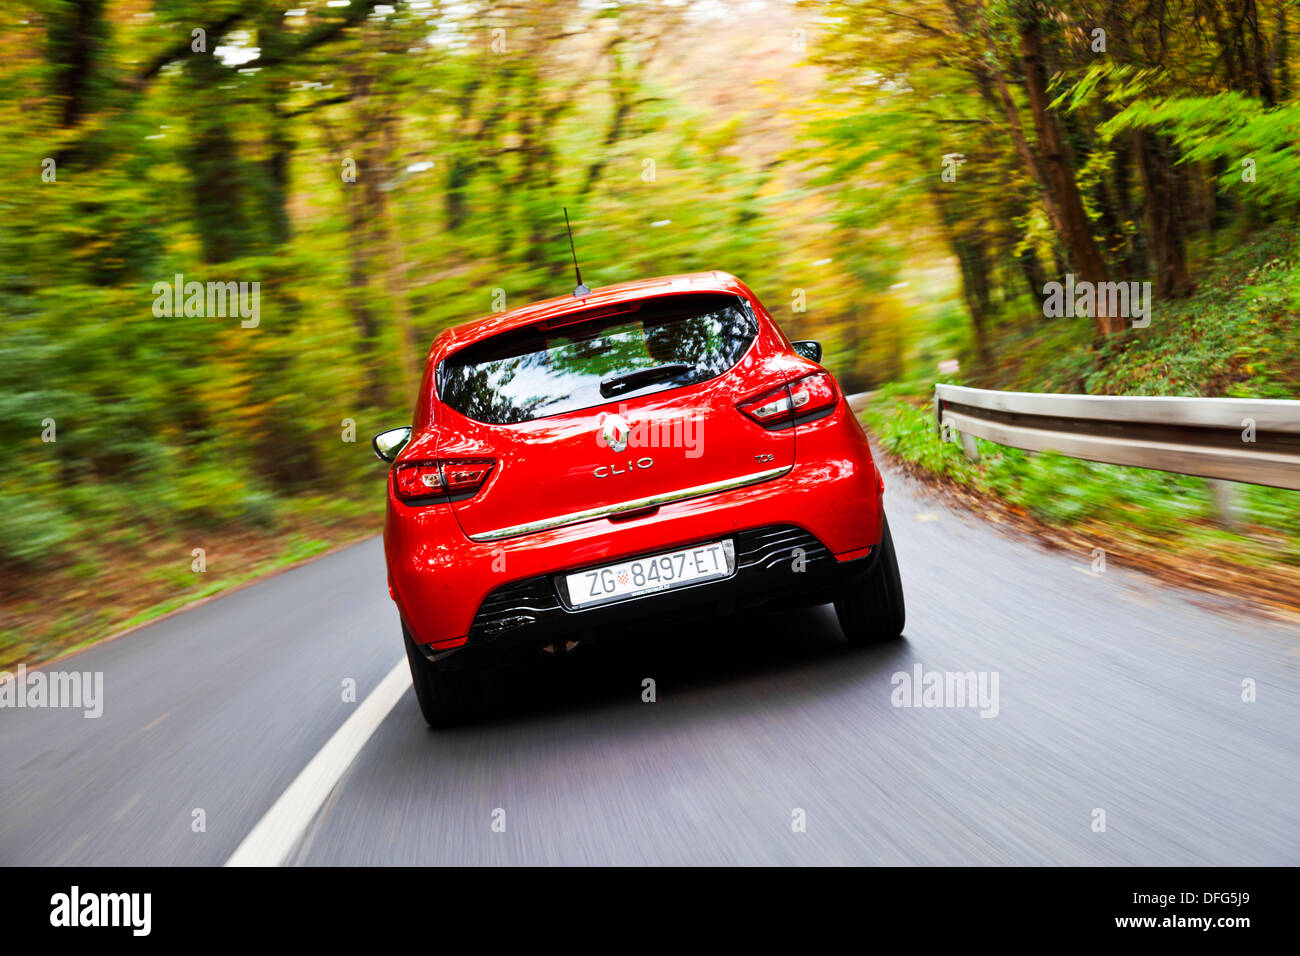 New Renault Clio 4 Officially Breaks Cover, Mega Gallery with 60 HD Photos  and Videos